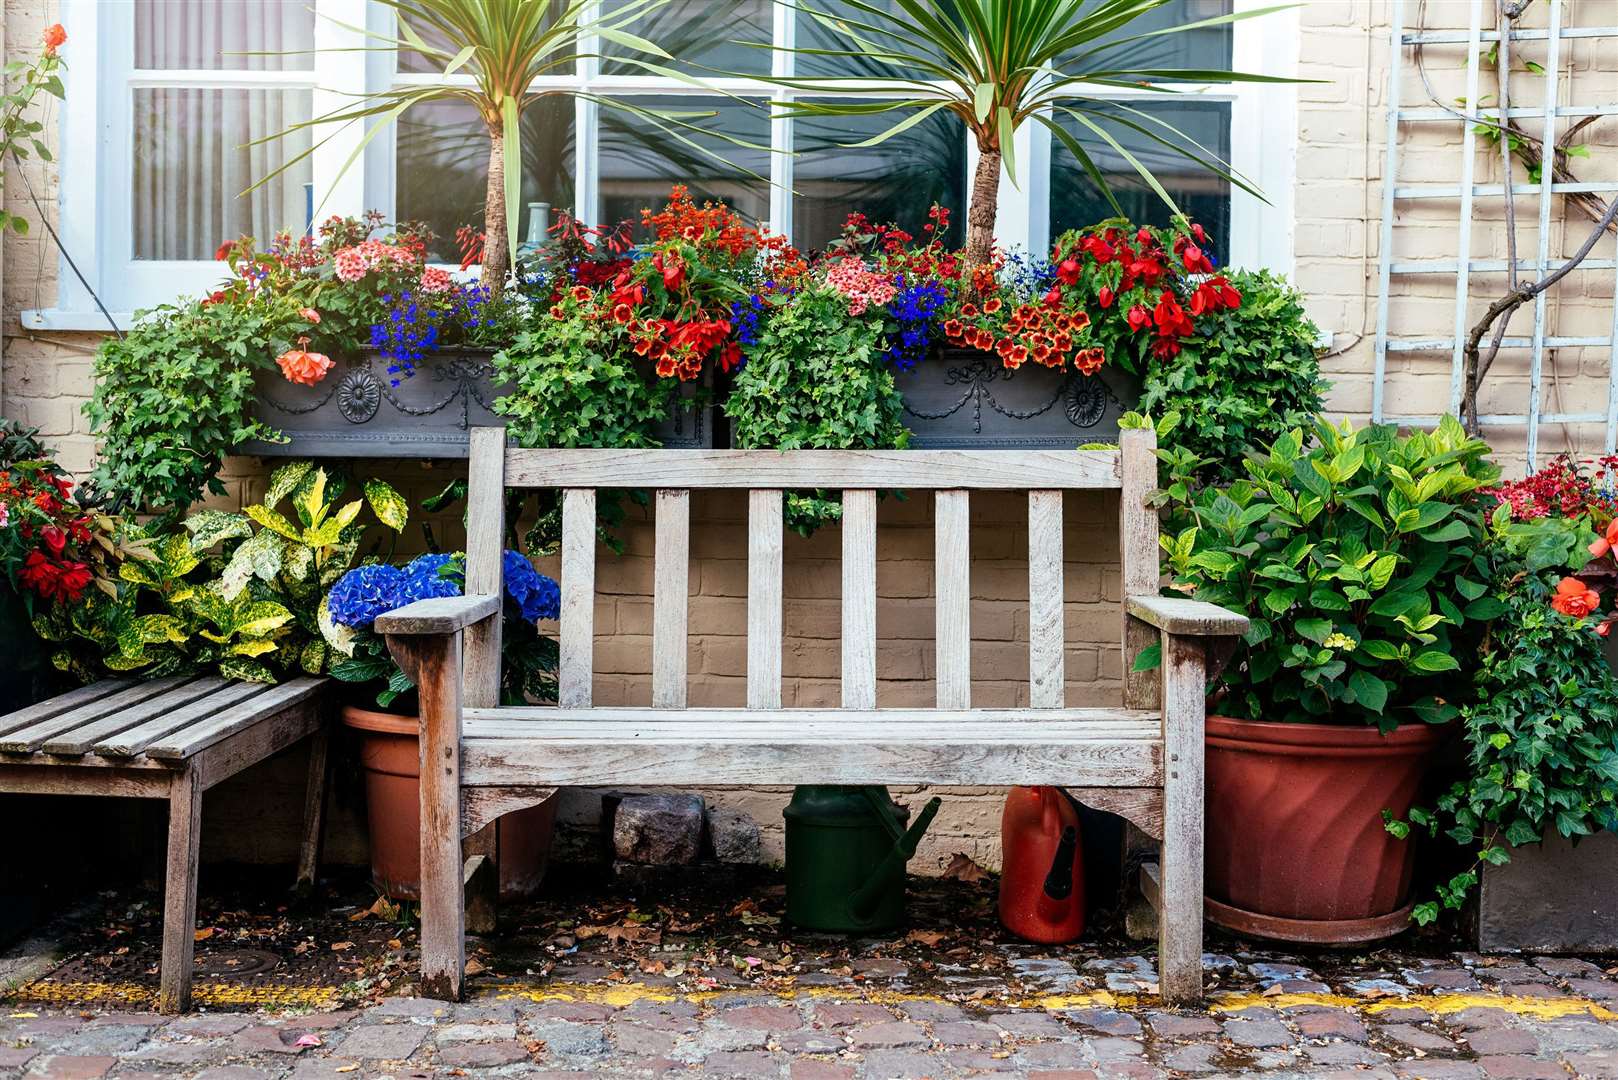 Add a bench to your front garden and spend time relaxing. Picture: iStock/PA